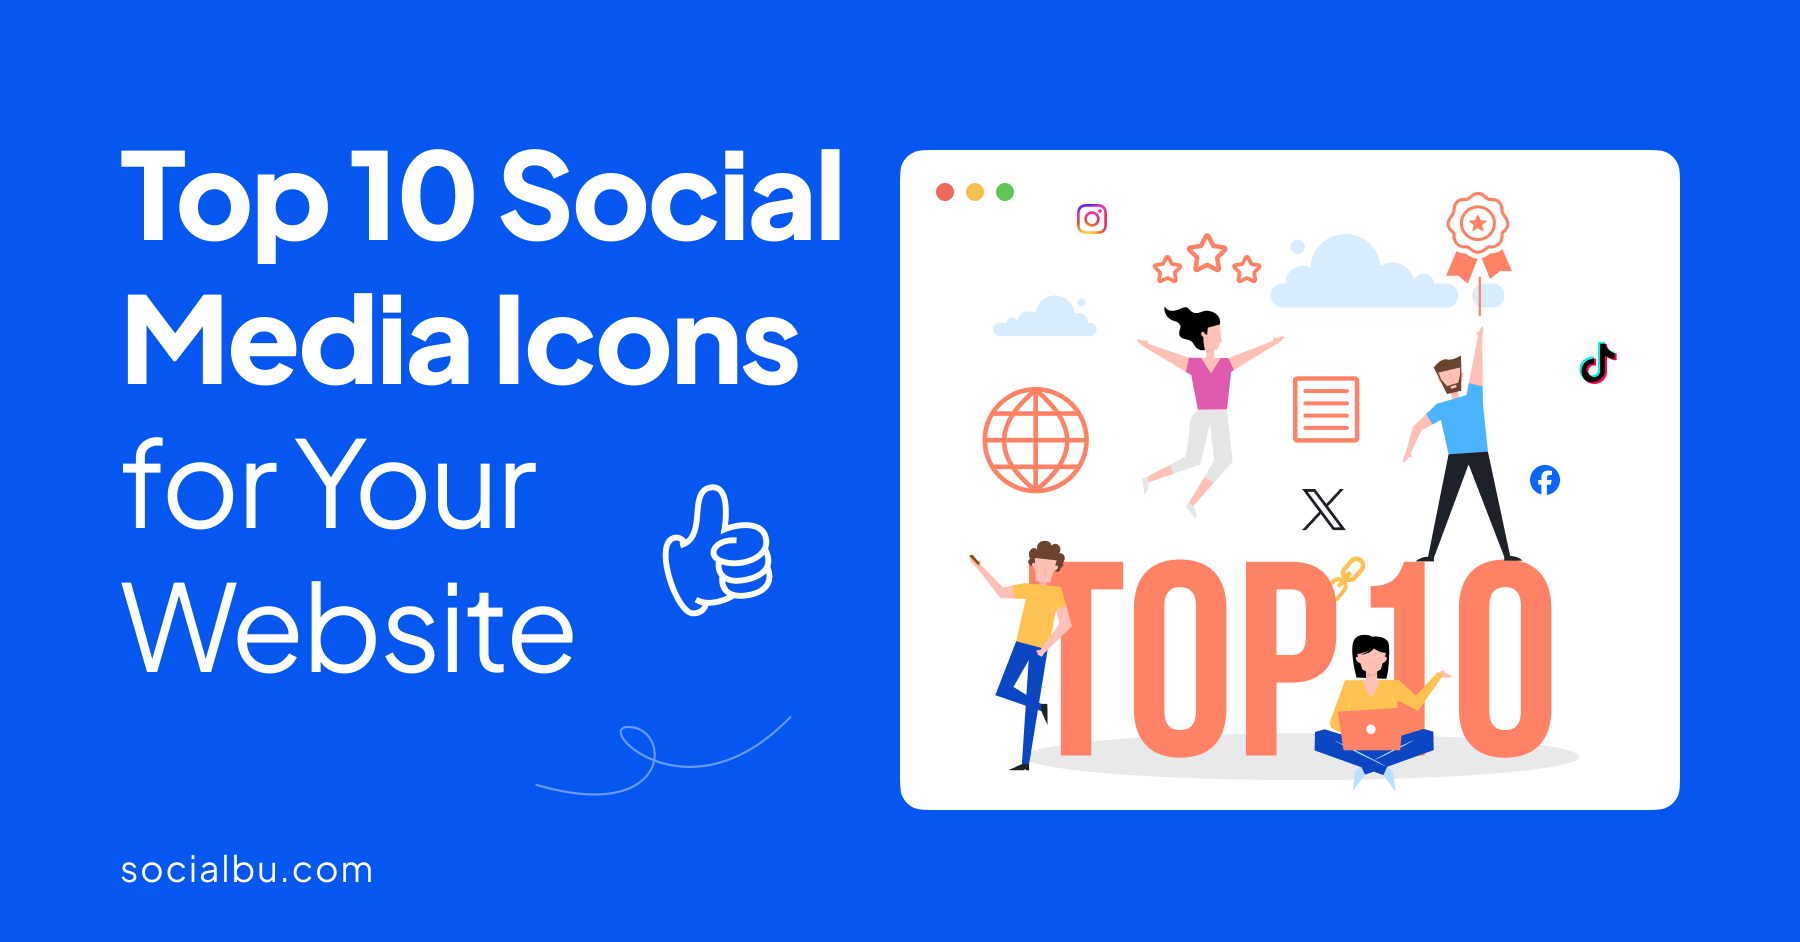 Top 10 Social Media Icons for Your Website